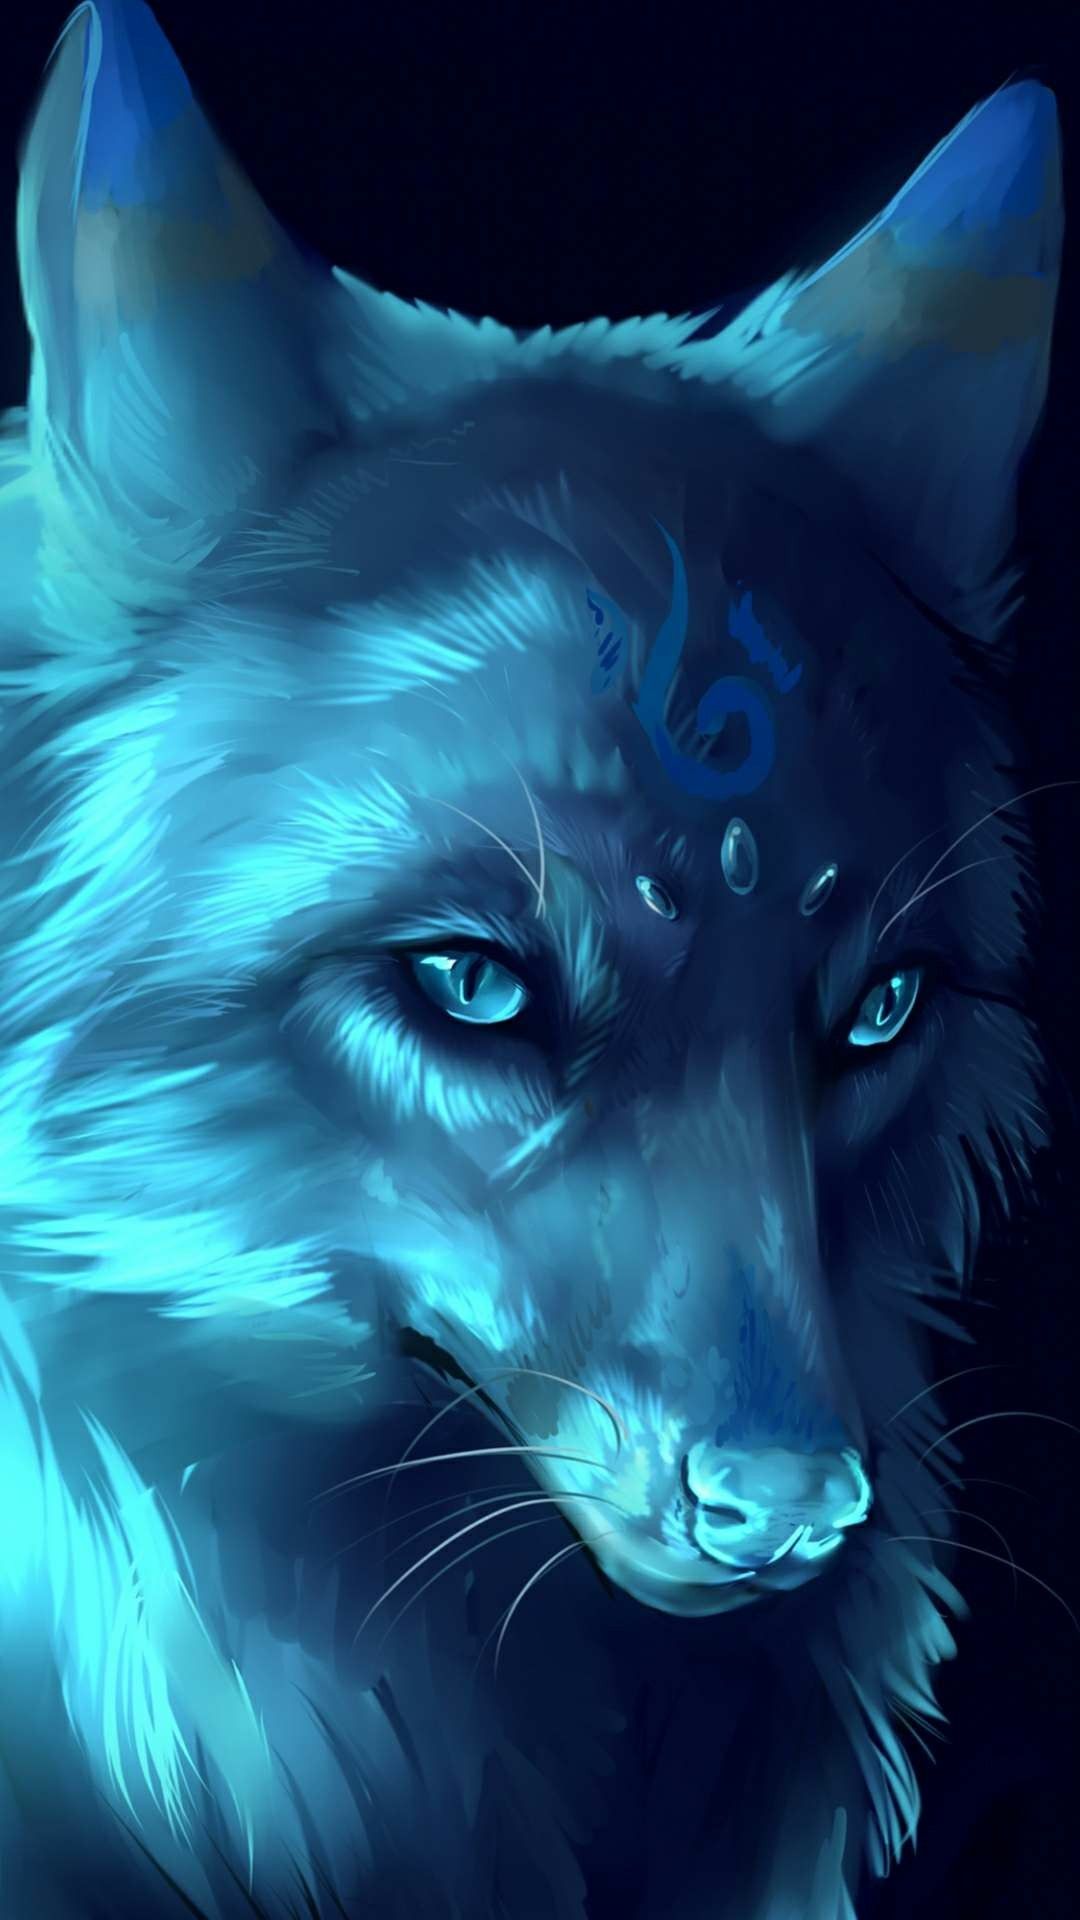 The perfect blue wolf. Ice wolf wallpaper, Fantasy wolf, Wolf wallpaper